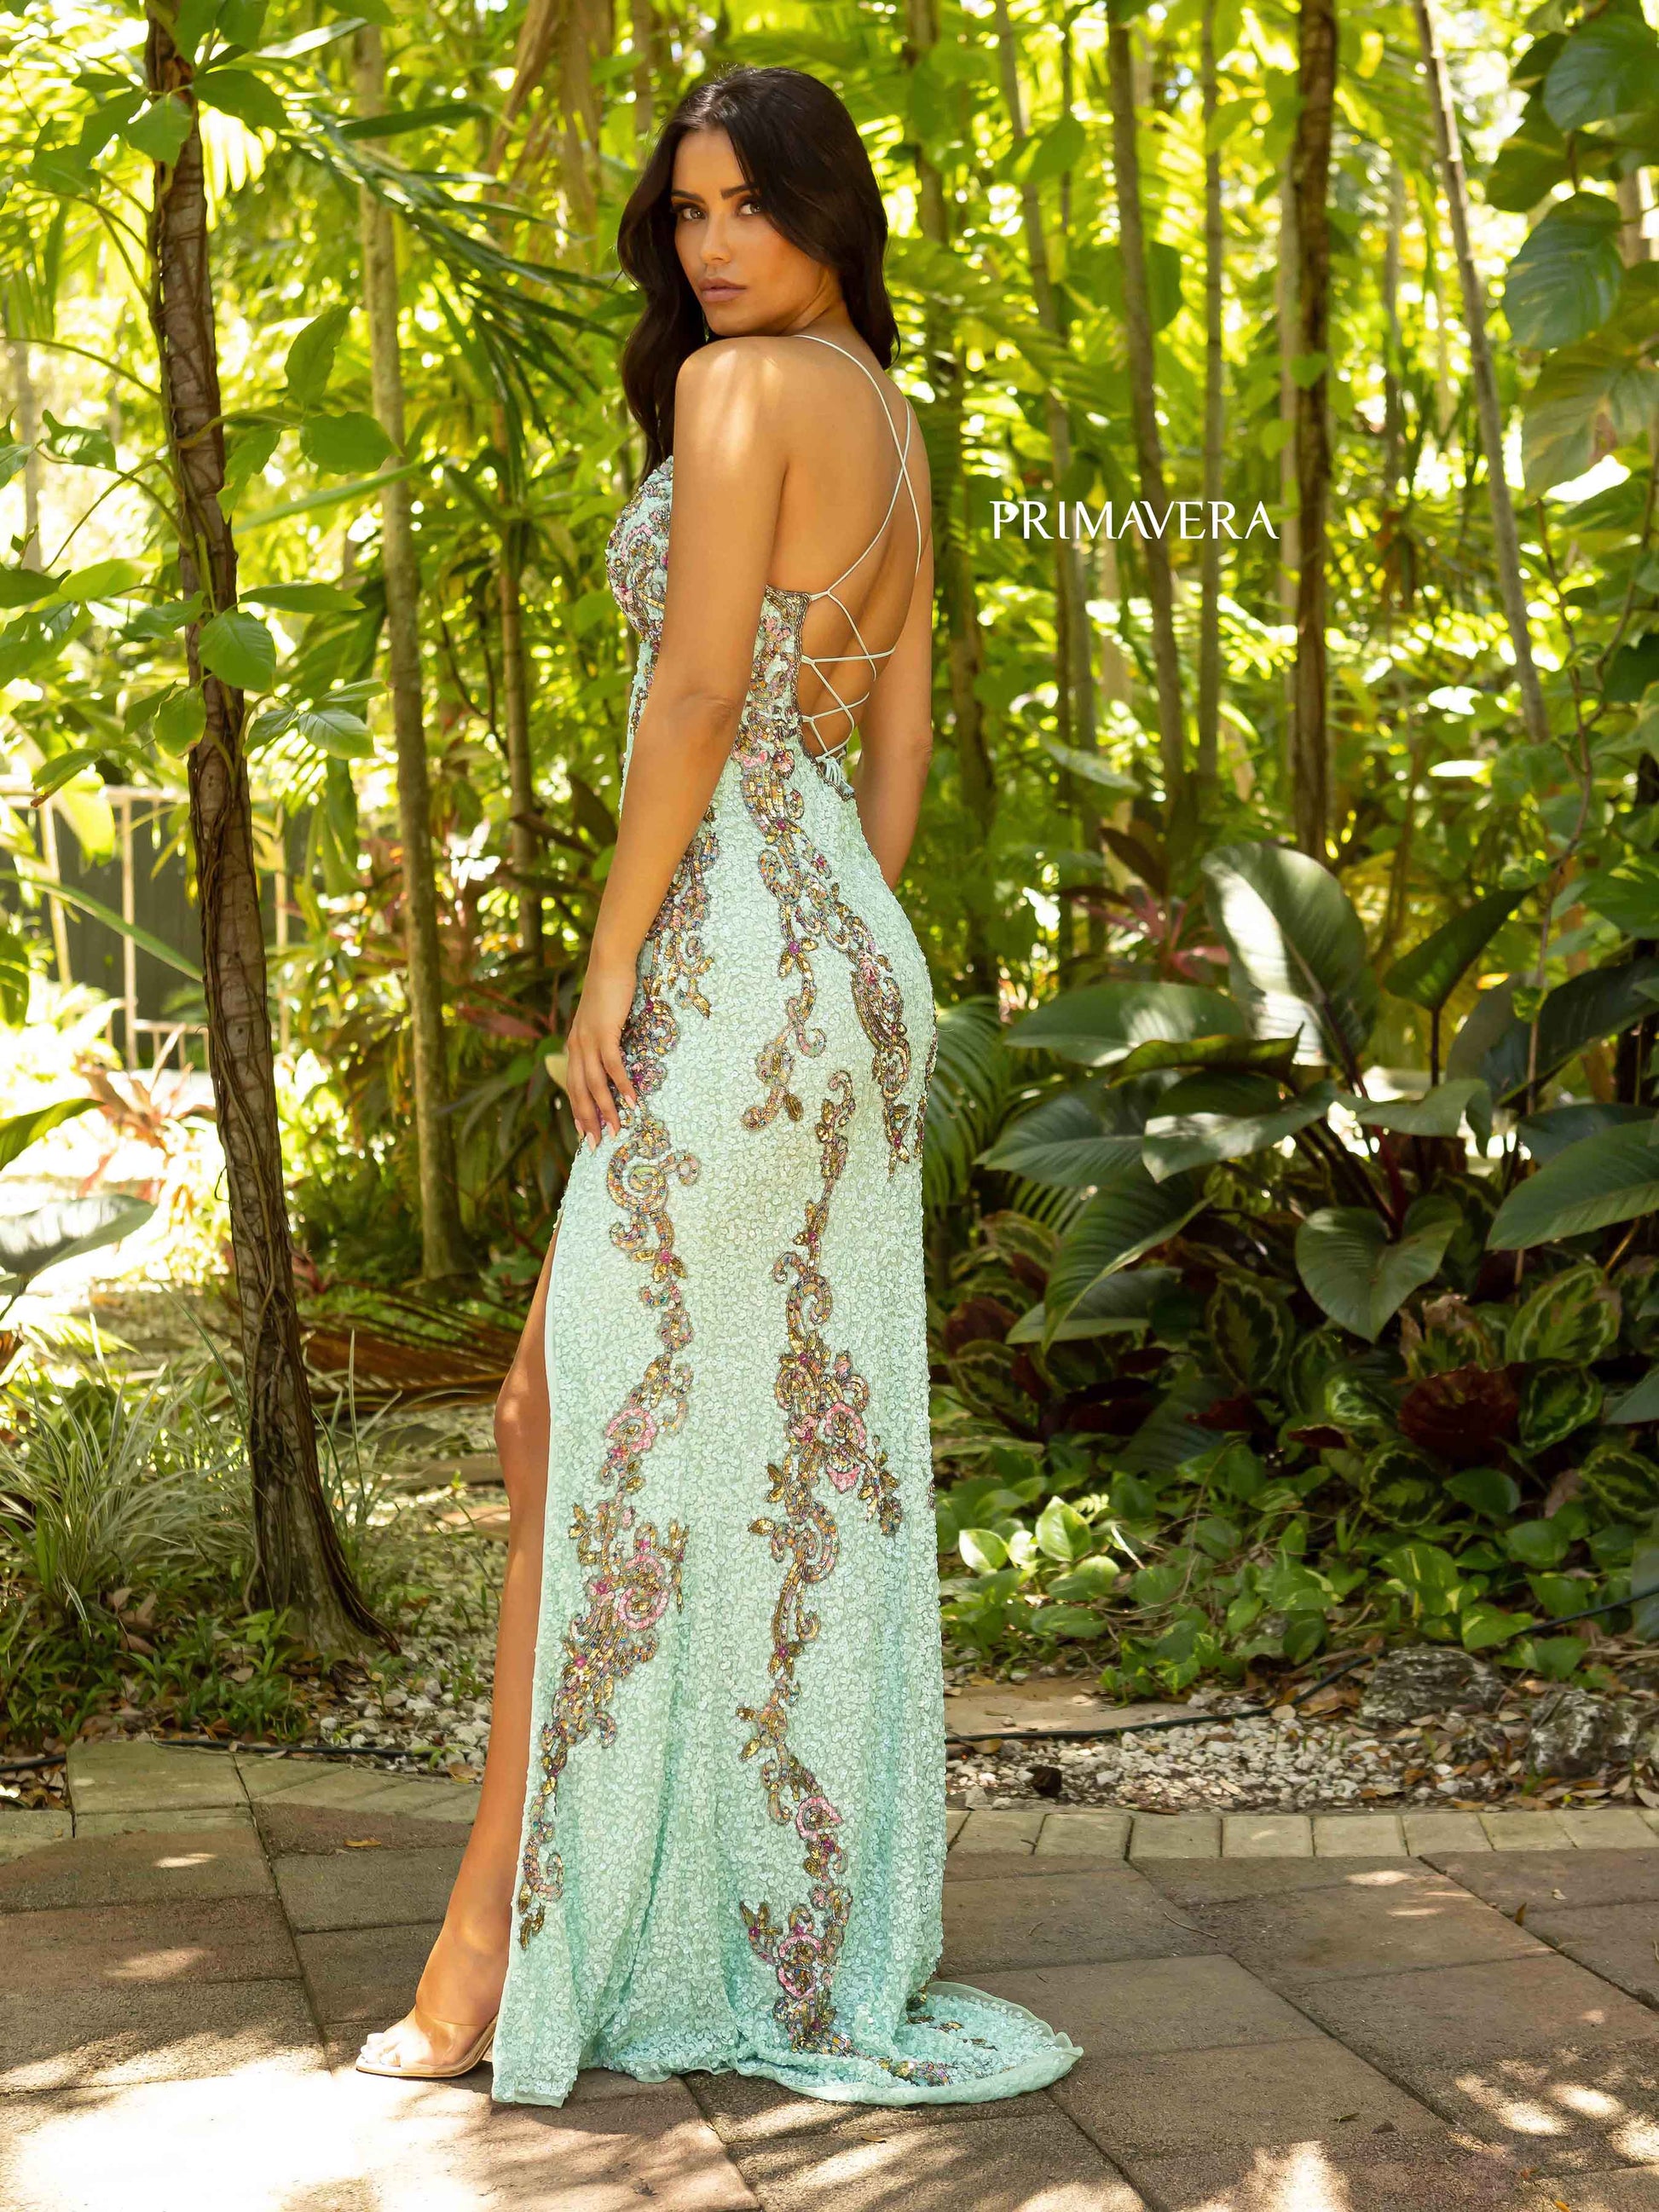 Primavera Couture 3211 Mint Green is a Long fitted sequin Embellished Formal Evening Gown. This Prom Dress Features a deep V Neck with an open Corset lace up back. Beaded & embellished elegant scroll pattern accentuate curves. Fully beaded prom dress with floral pattern and side slit. Long Sequin Gown featuring a v neckline. slit in the fitted skirt, Slit in Thigh. Stunning Pageant Dress, Prom Gown & More! back